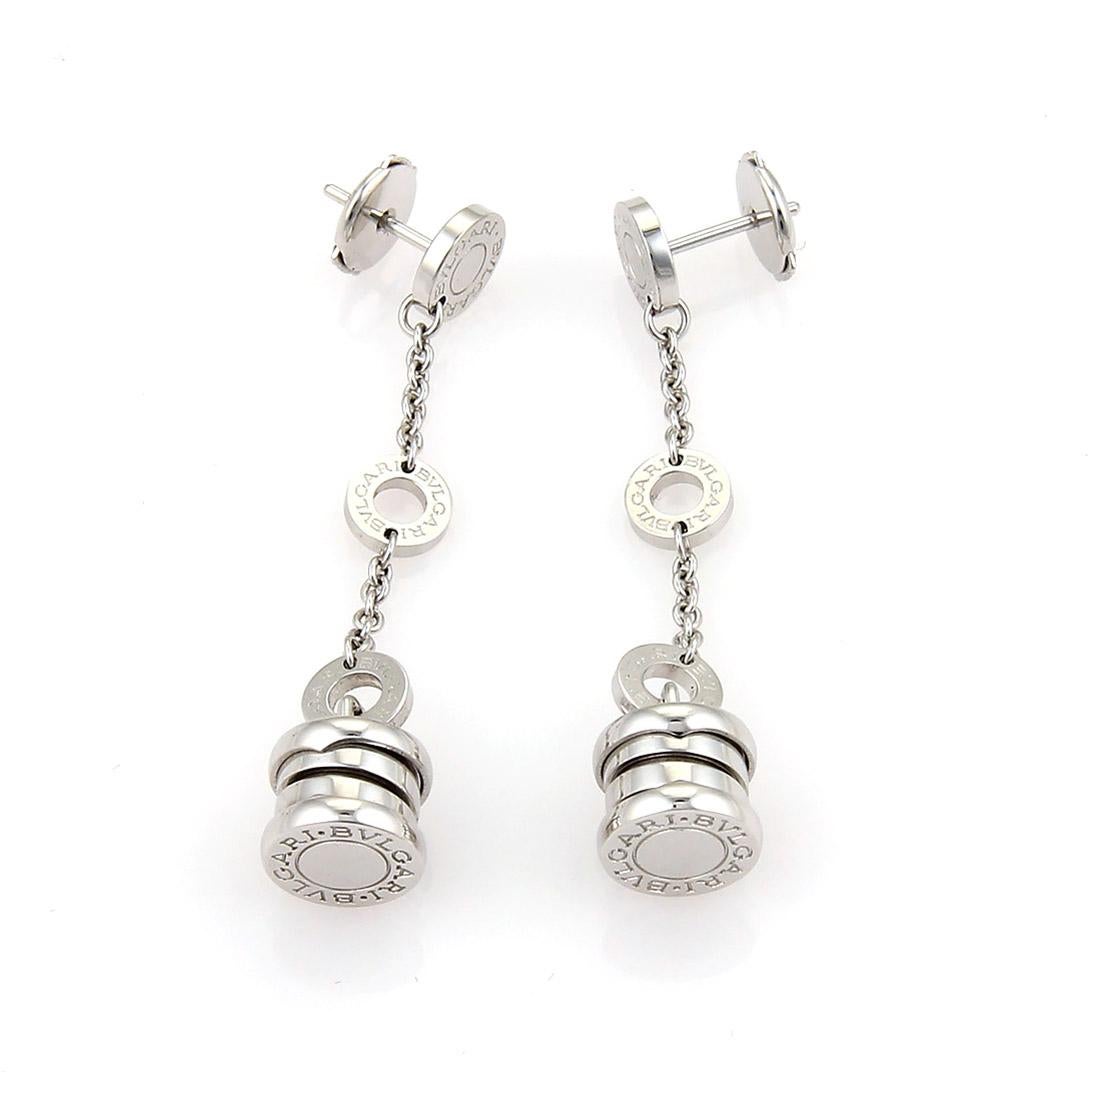 Bvlgari B.zero1 Dangling 18k White Gold Earrings In Excellent Condition For Sale In Boca Raton, FL